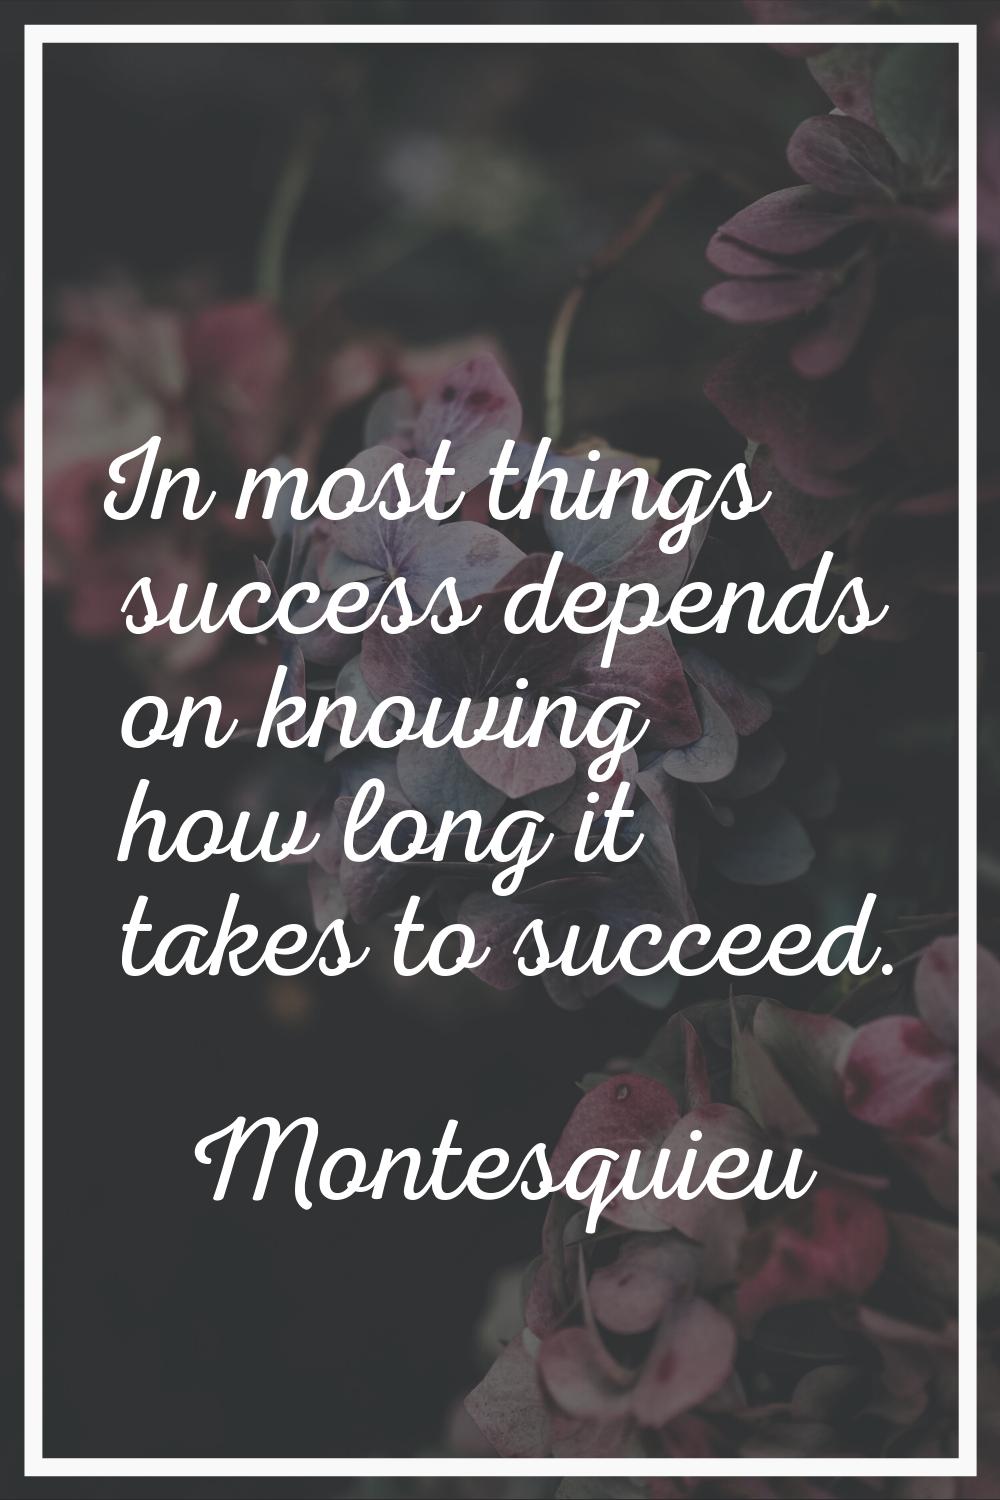 In most things success depends on knowing how long it takes to succeed.